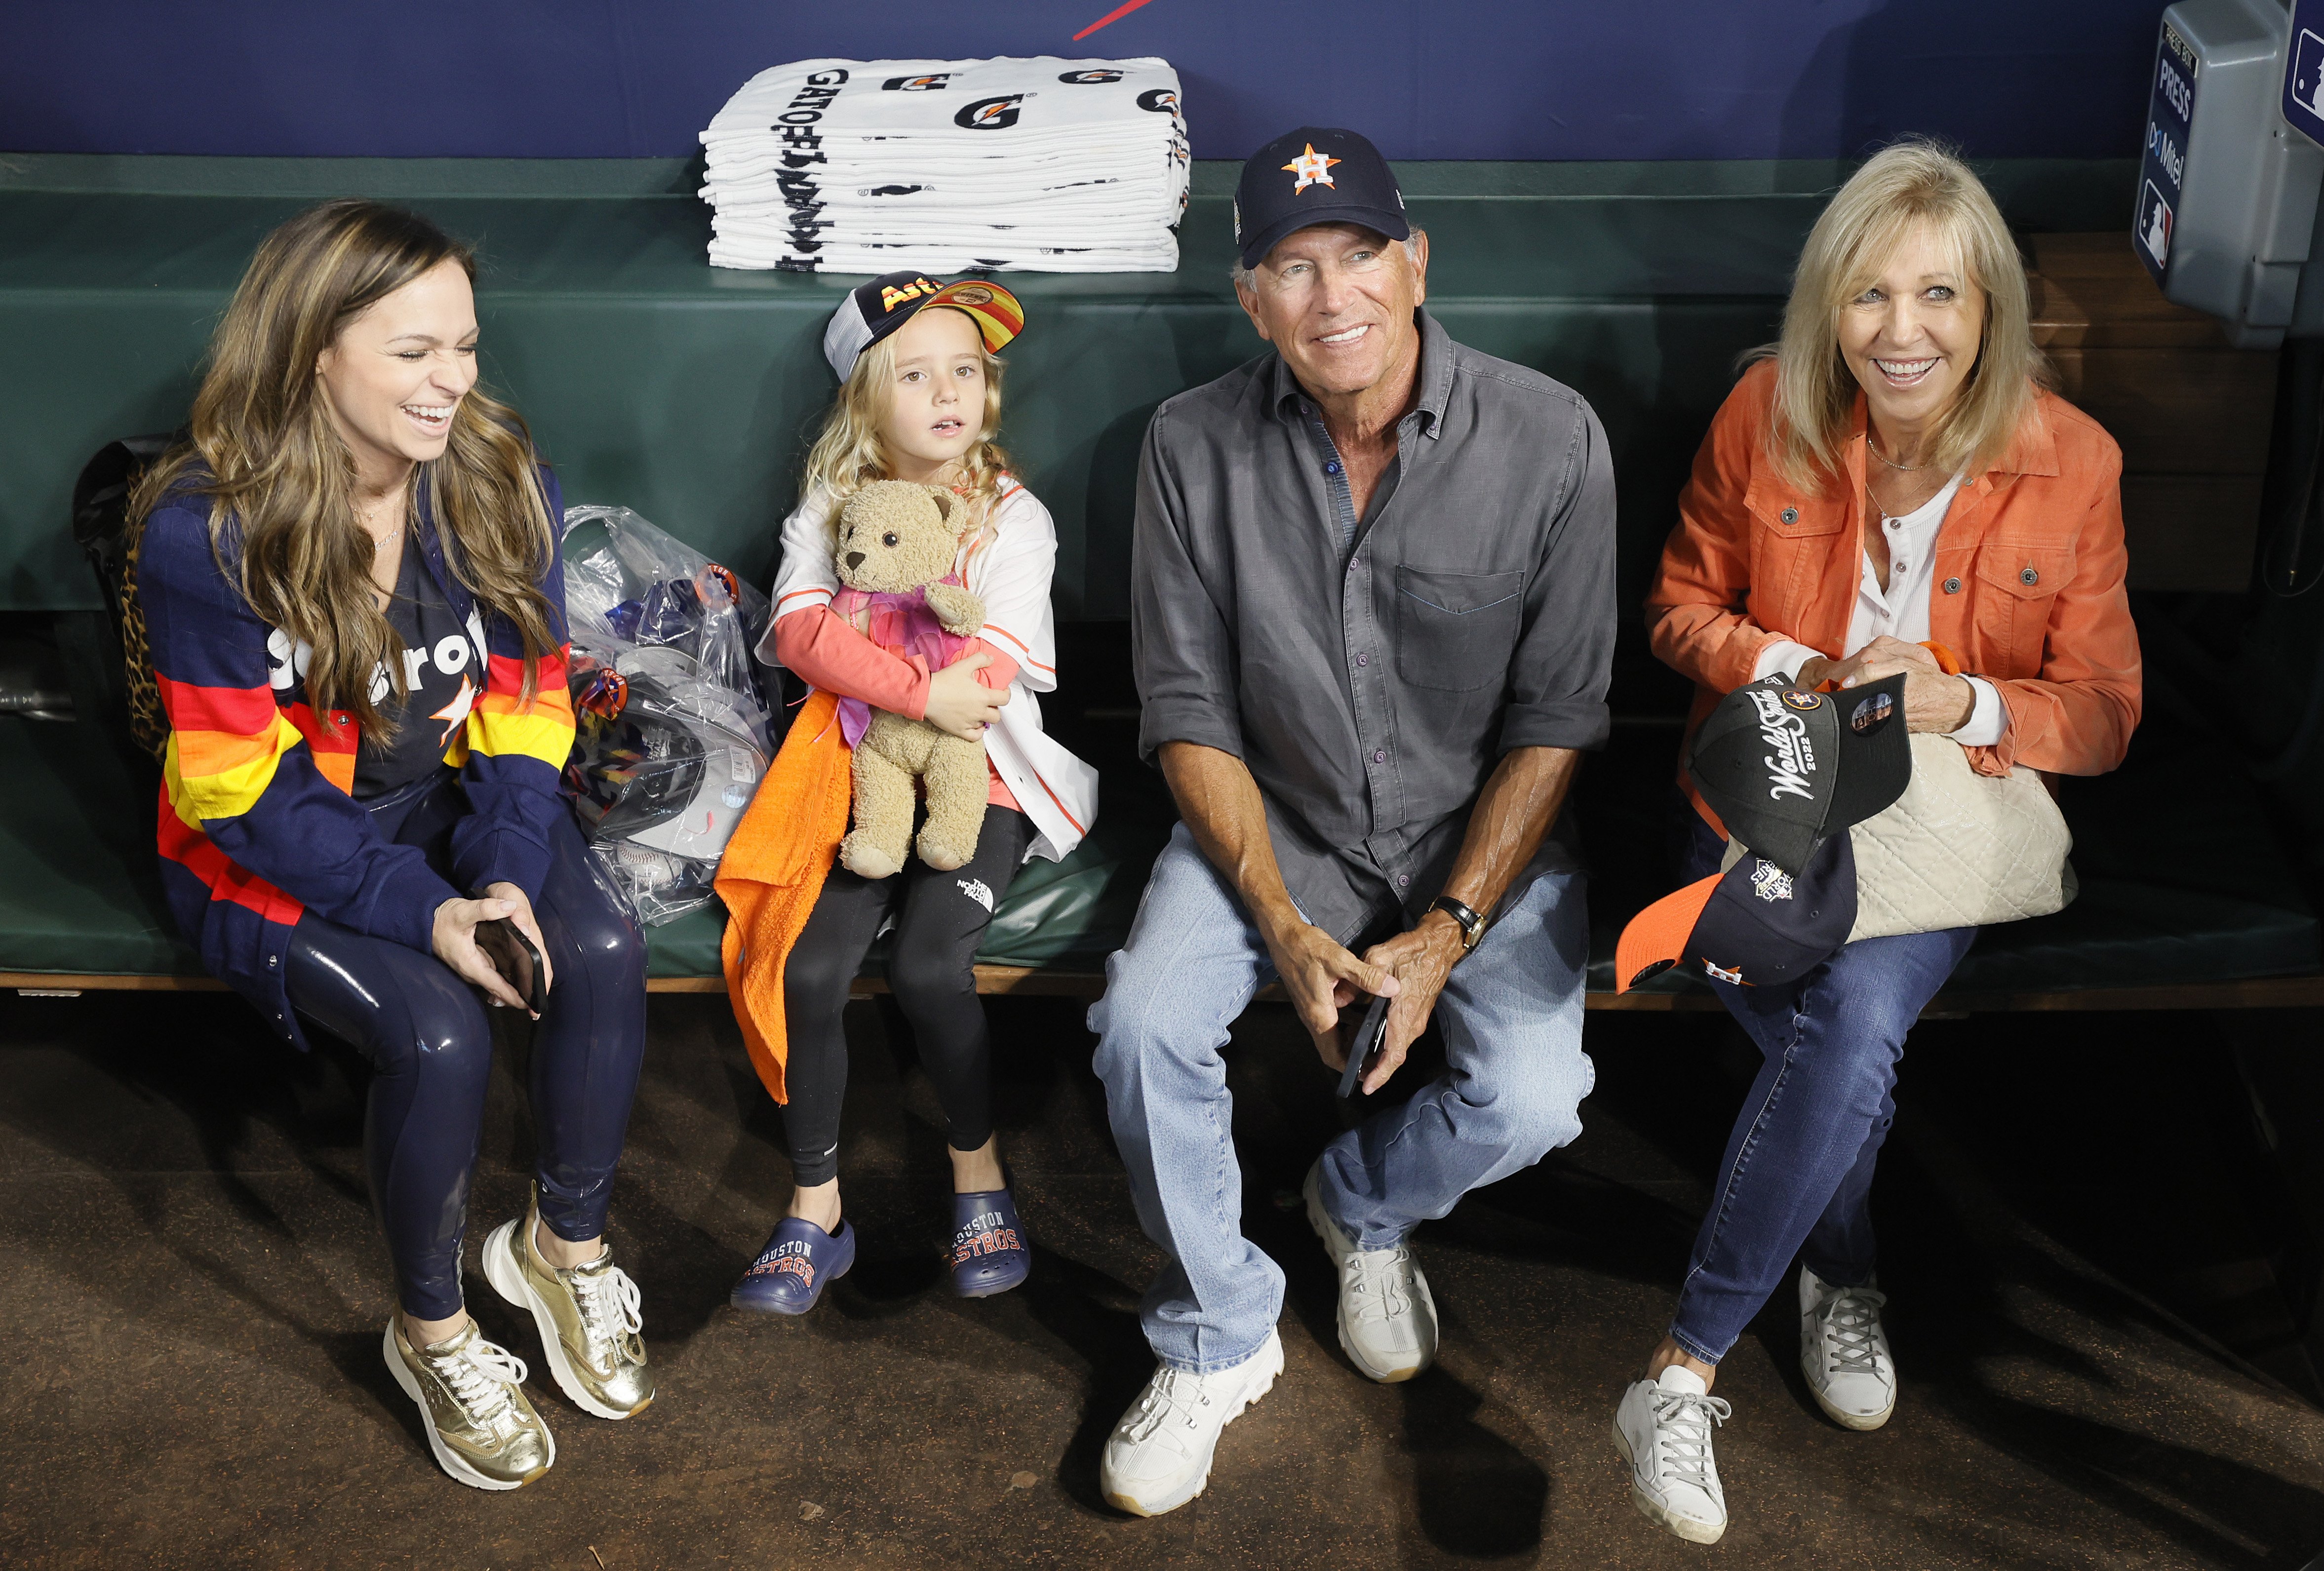 George Strait pictured with his family prior to Game Six of the 2022 World Series at Minute Maid Park on November 5, 2022 in Houston, Texas ┃Source: Getty Images